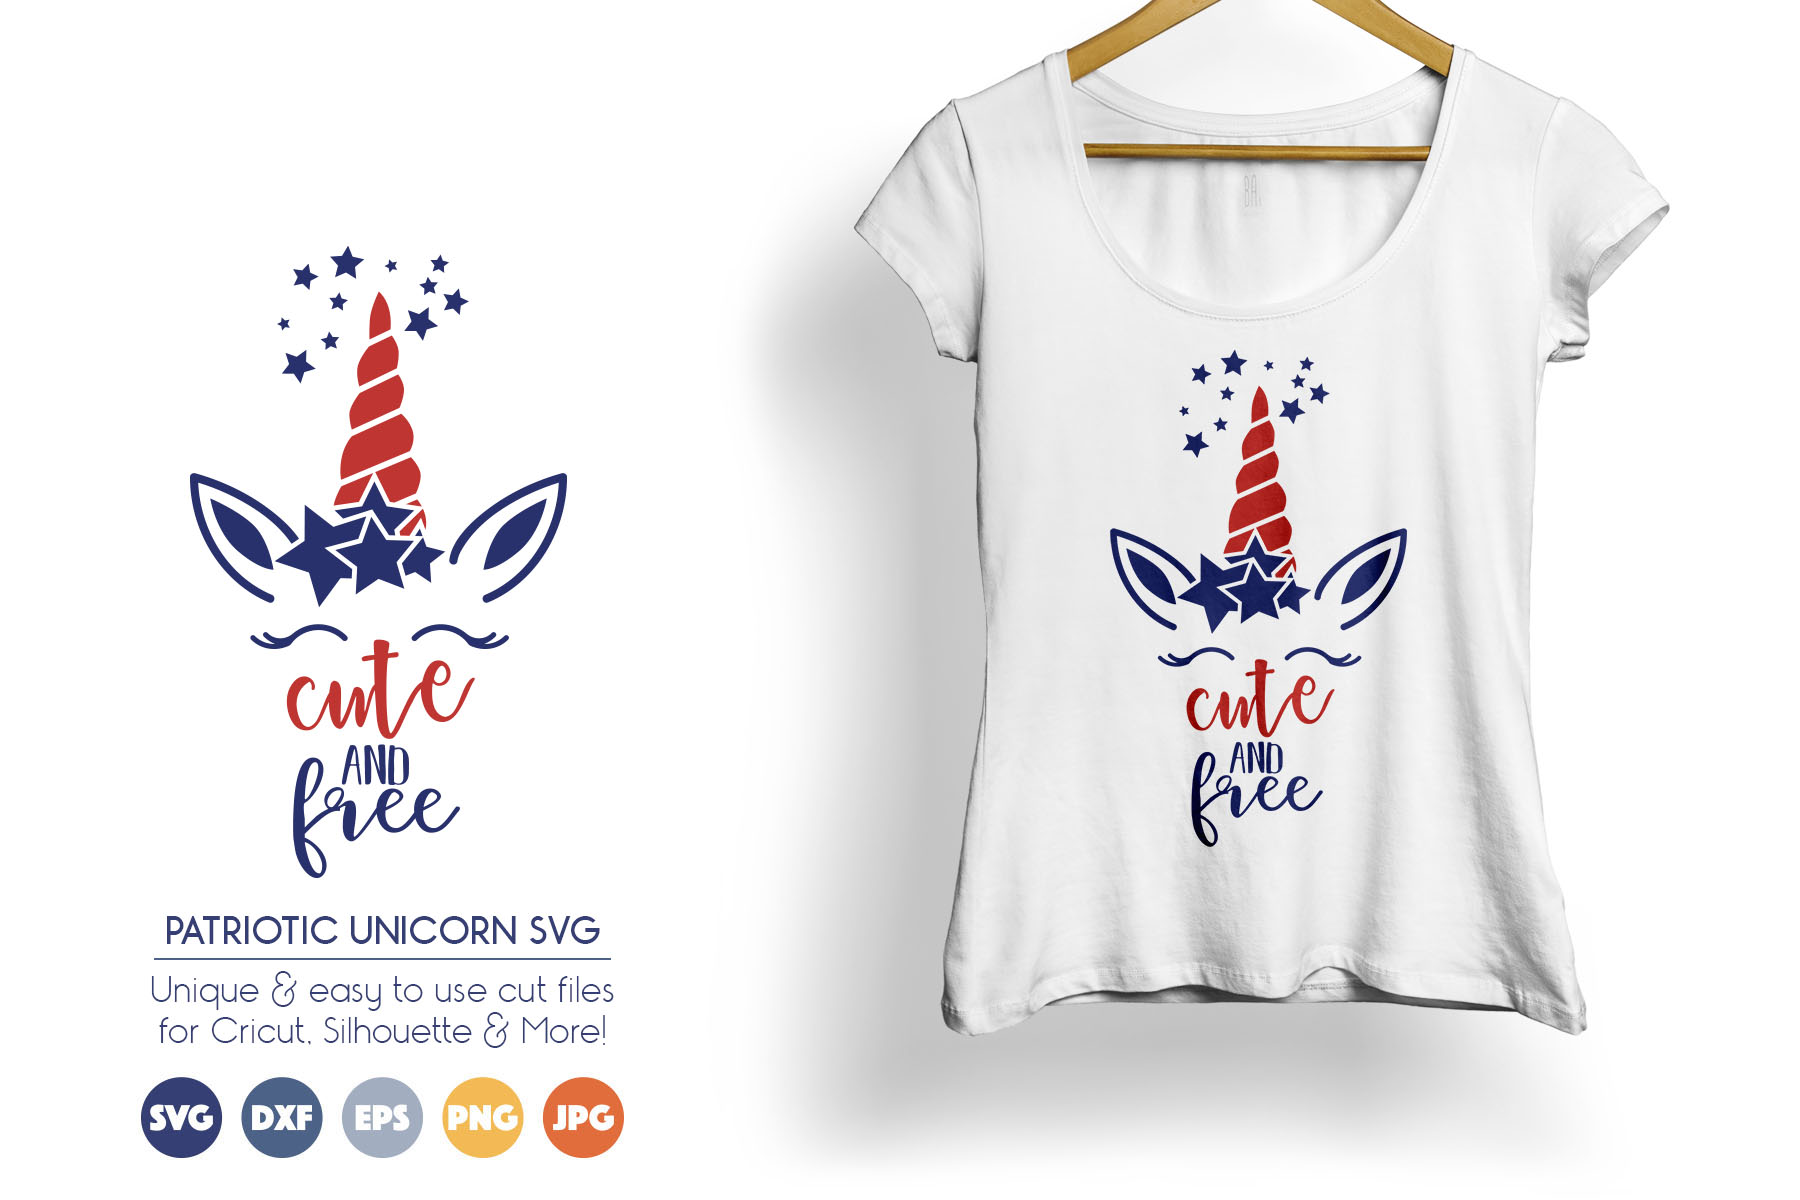 Patriotic Unicorn SVG Cut Files - July 4th - Cute and Free